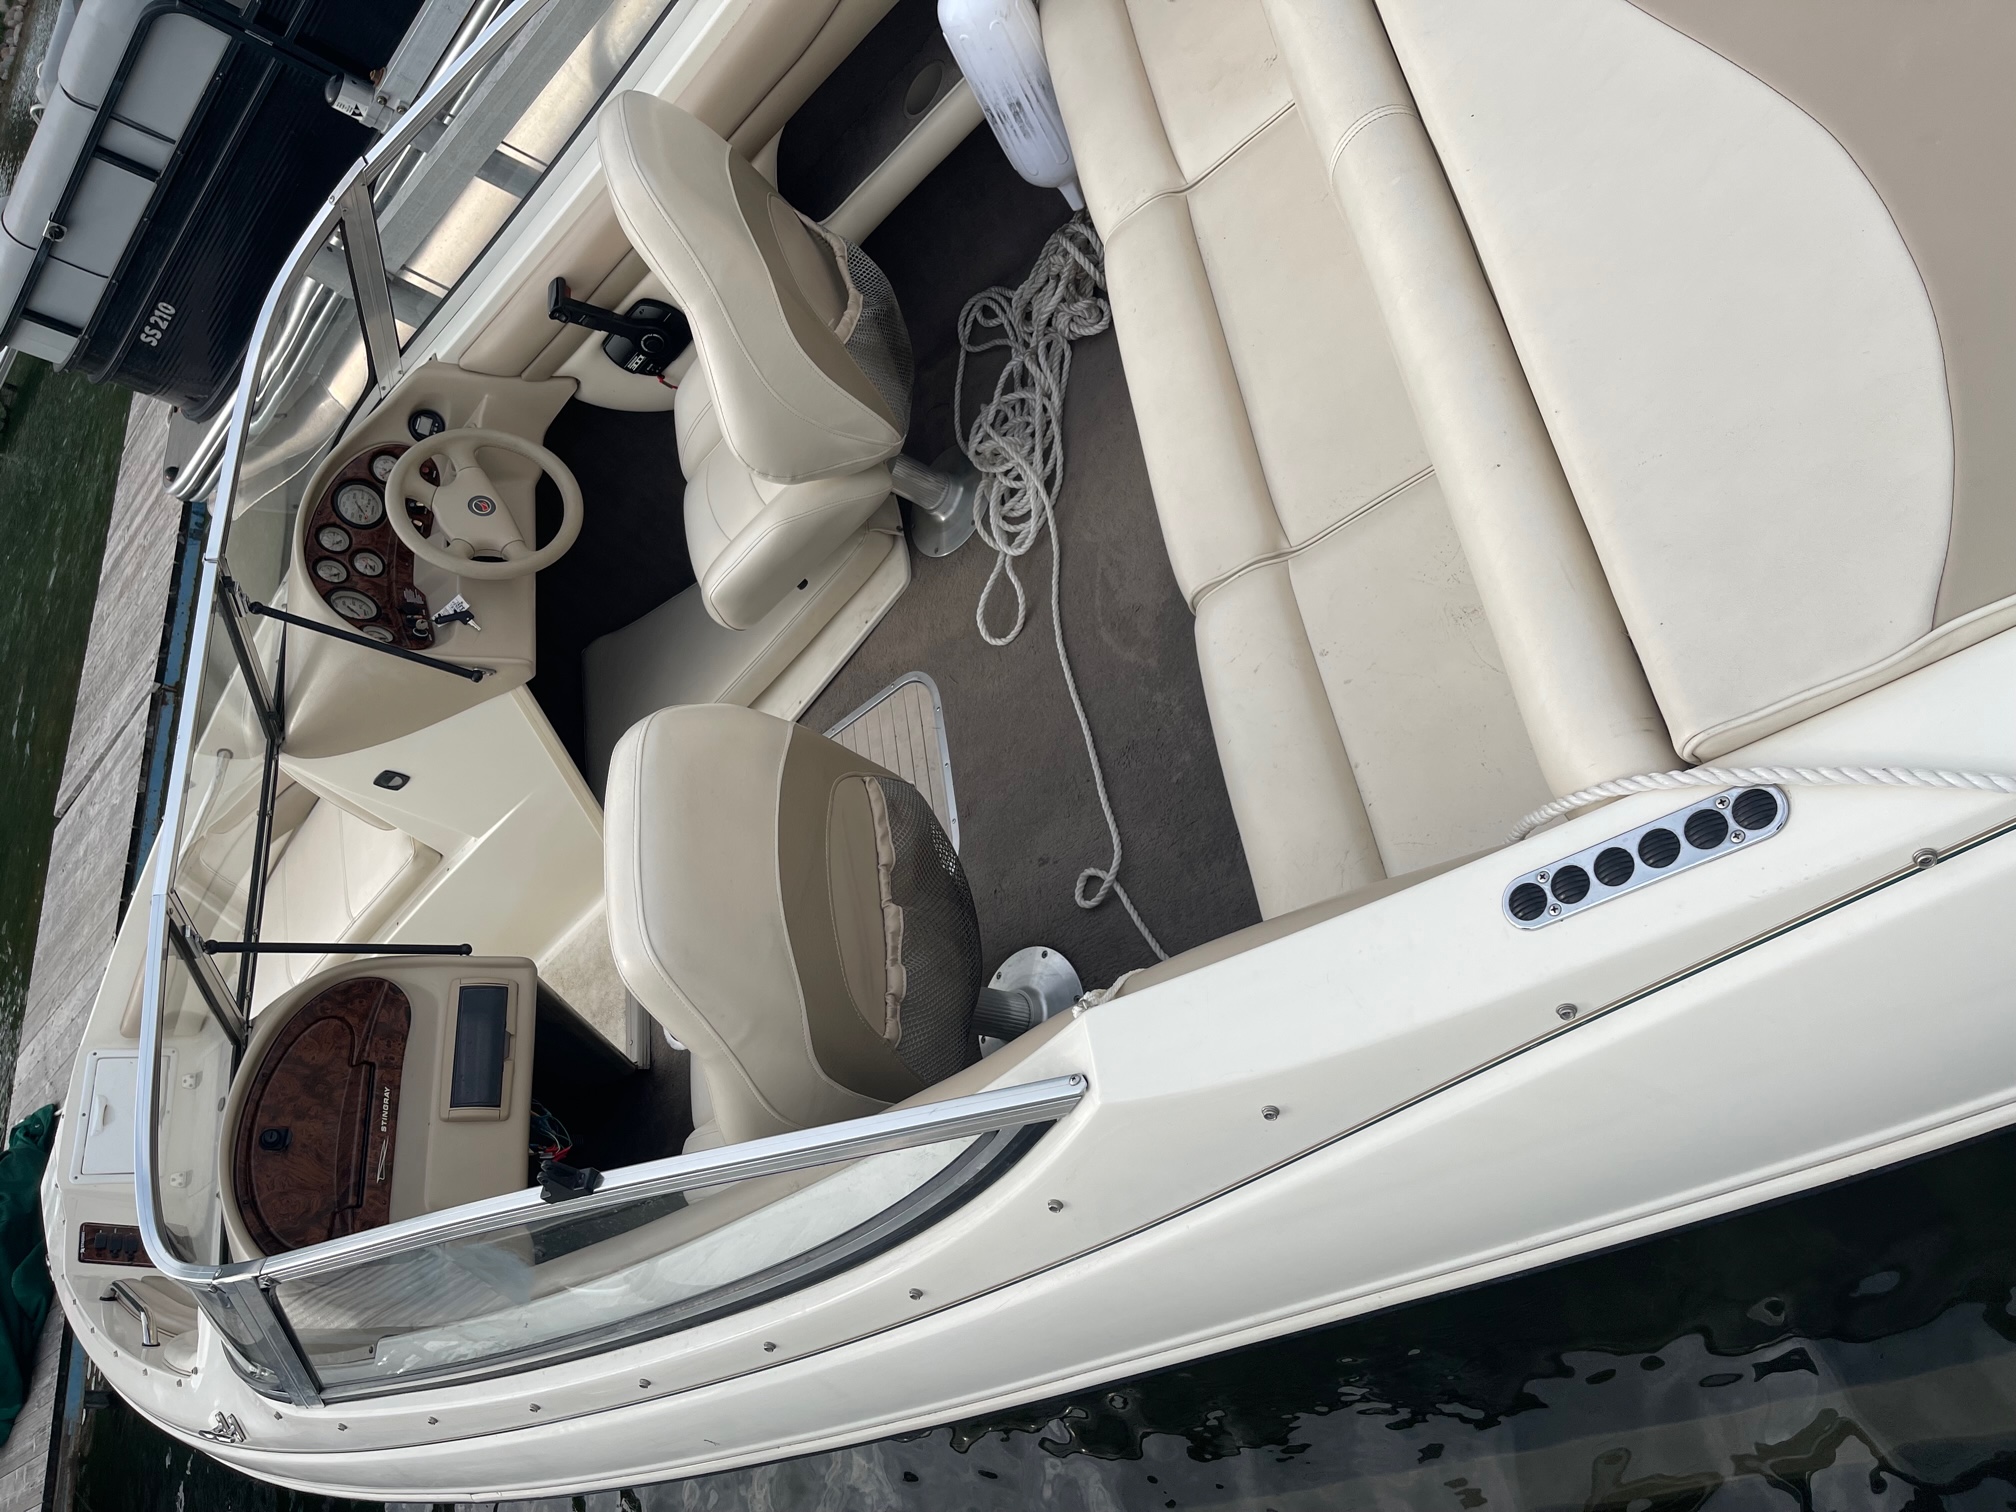 2000 Stingray 190FX Power boat for sale in Twin Lakes, WI - image 9 